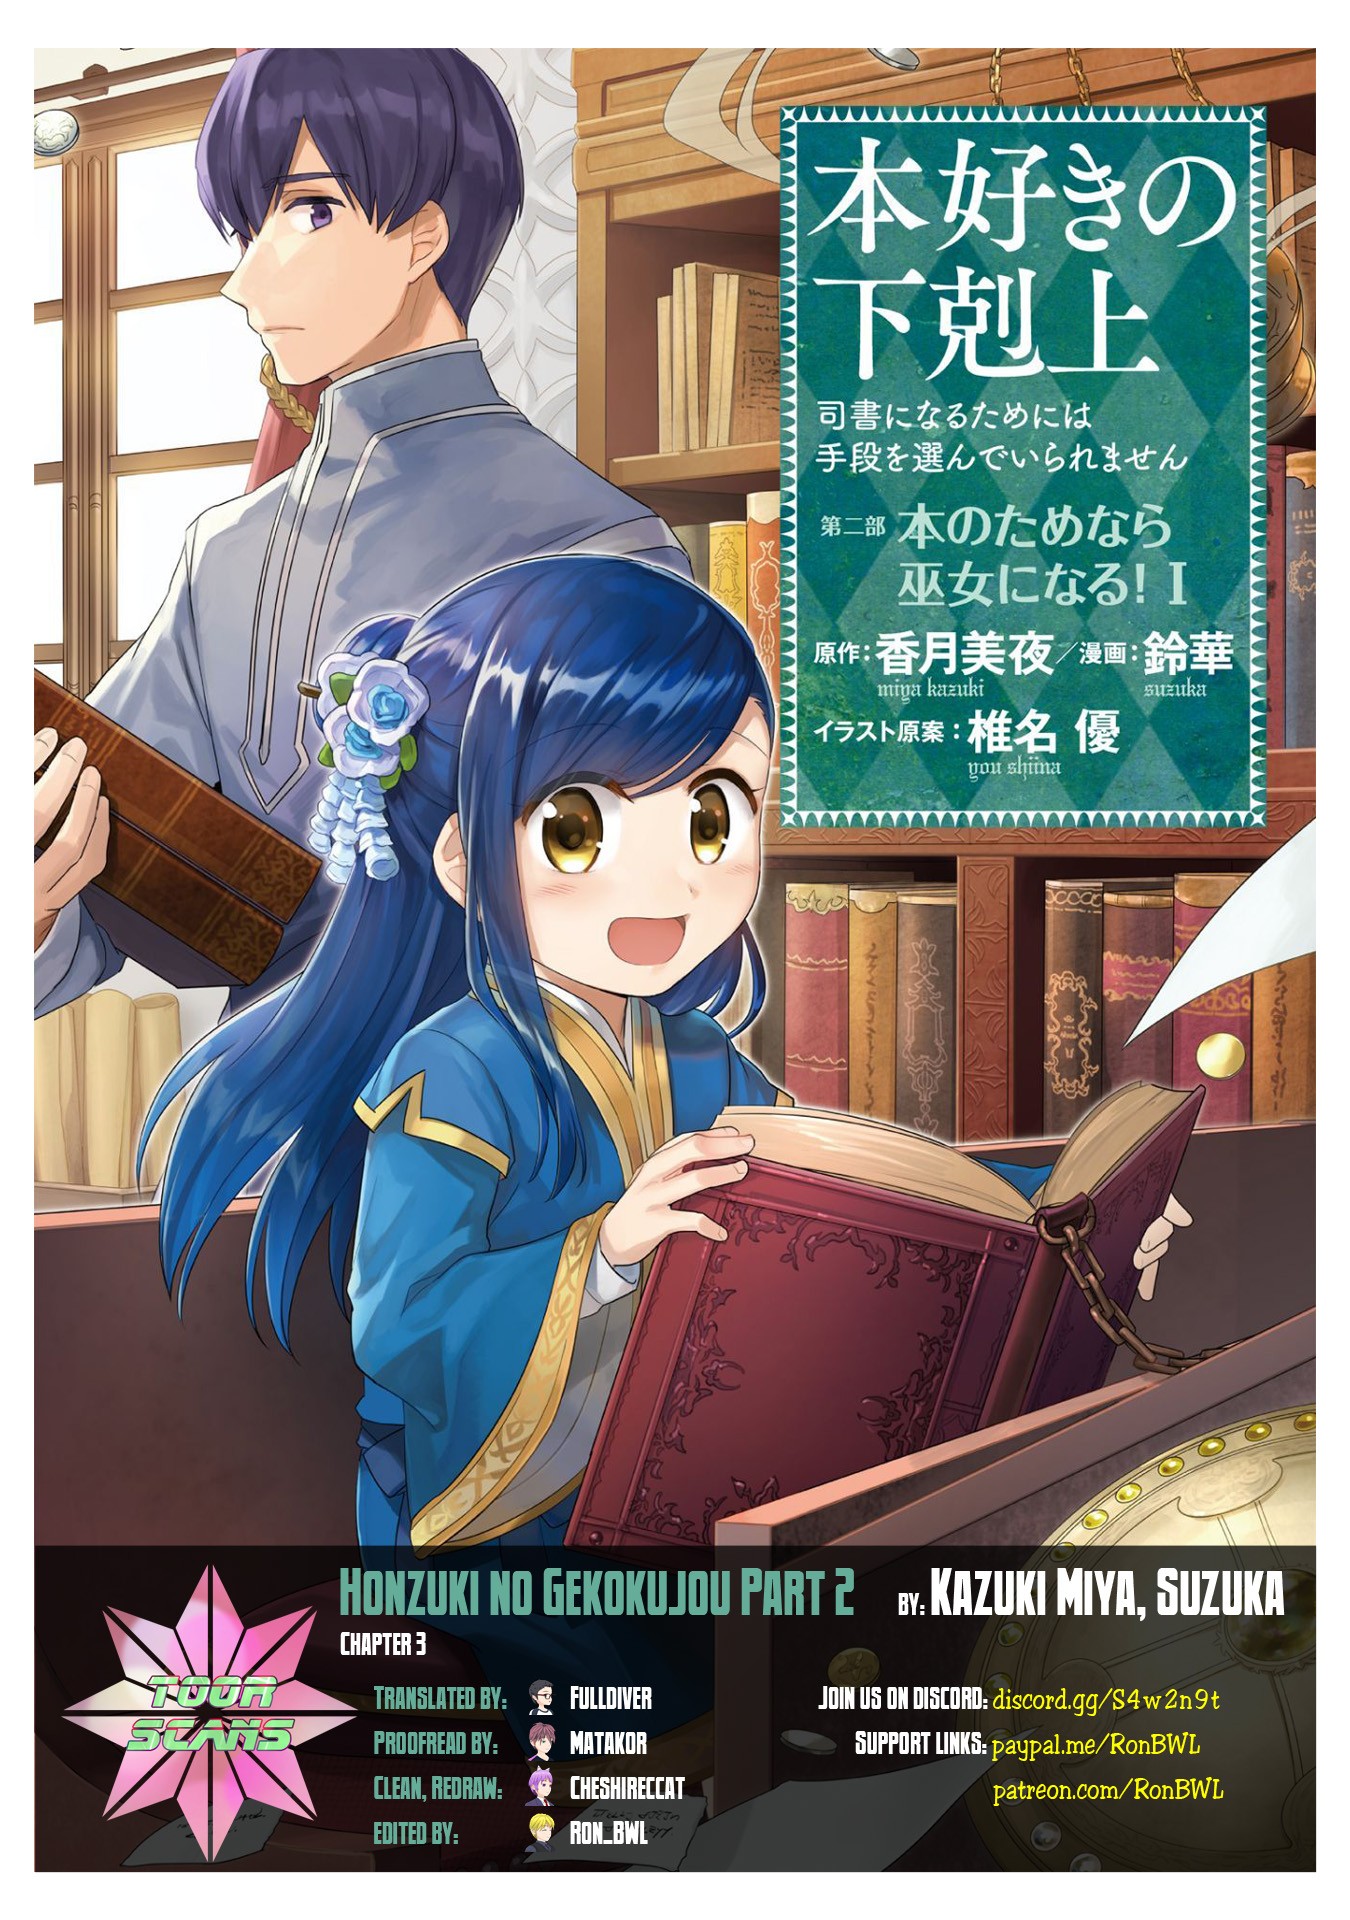 Ascendance Of A Bookworm ~I'll Do Anything To Become A Librarian~ Part 2 「I'll Become A Shrine Maiden For Books!」 Chapter 3